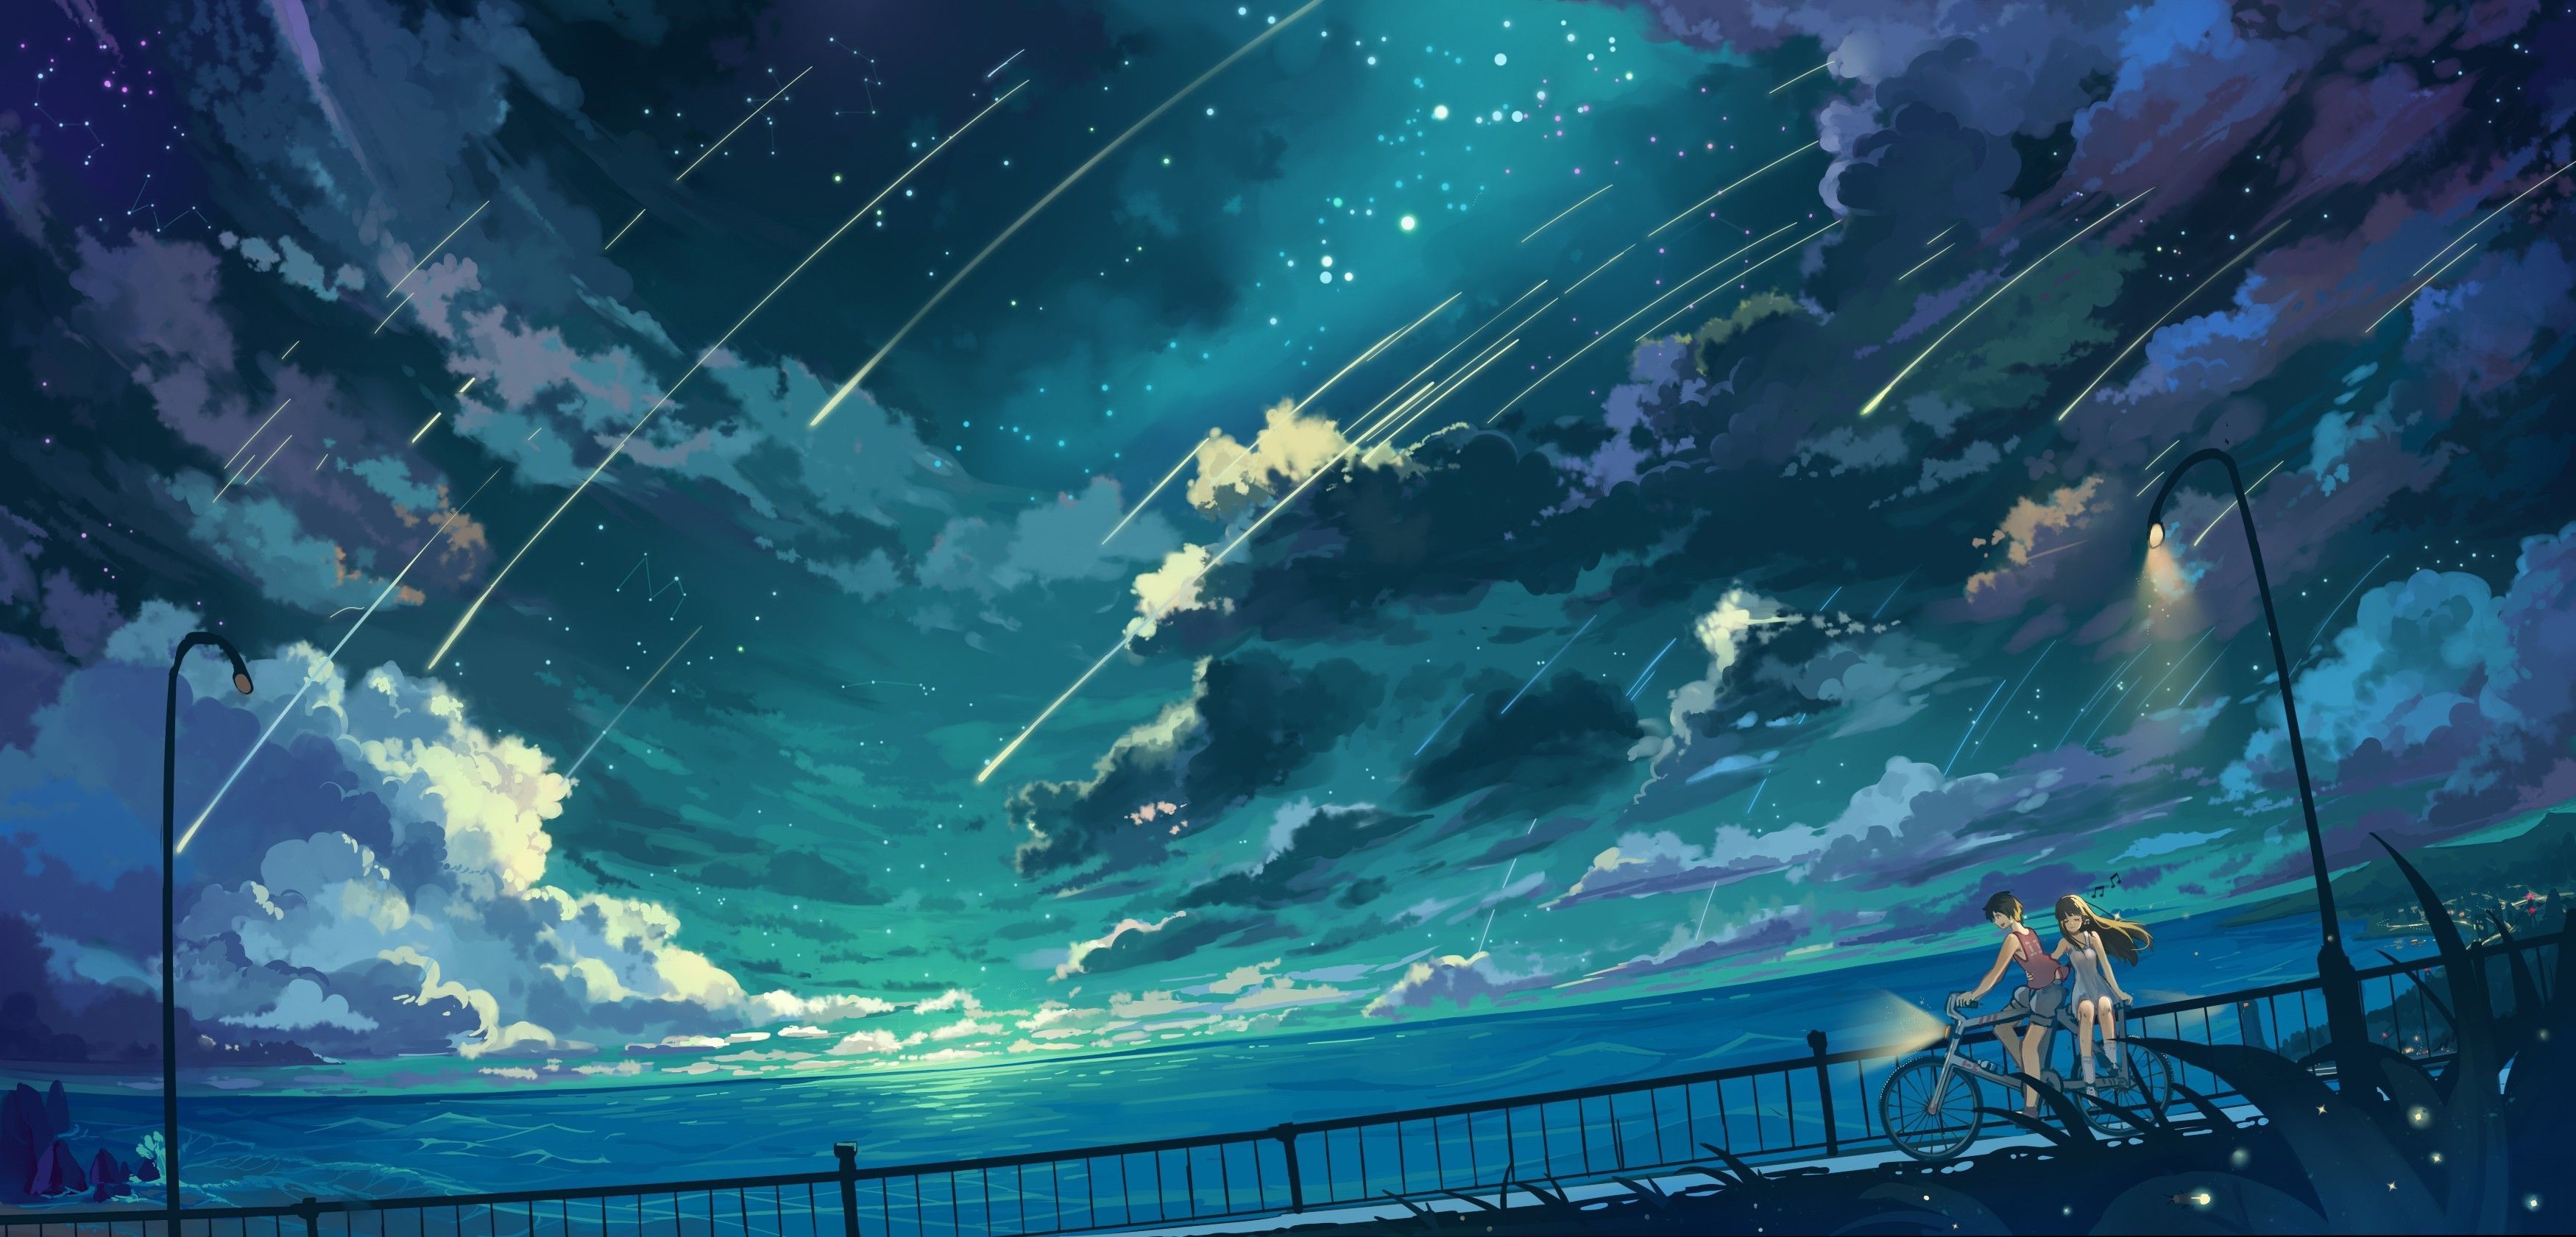 Res: 3500x HD Wallpaper. Background Image. Anime Original. Anime scenery, Anime background, Scenery wallpaper